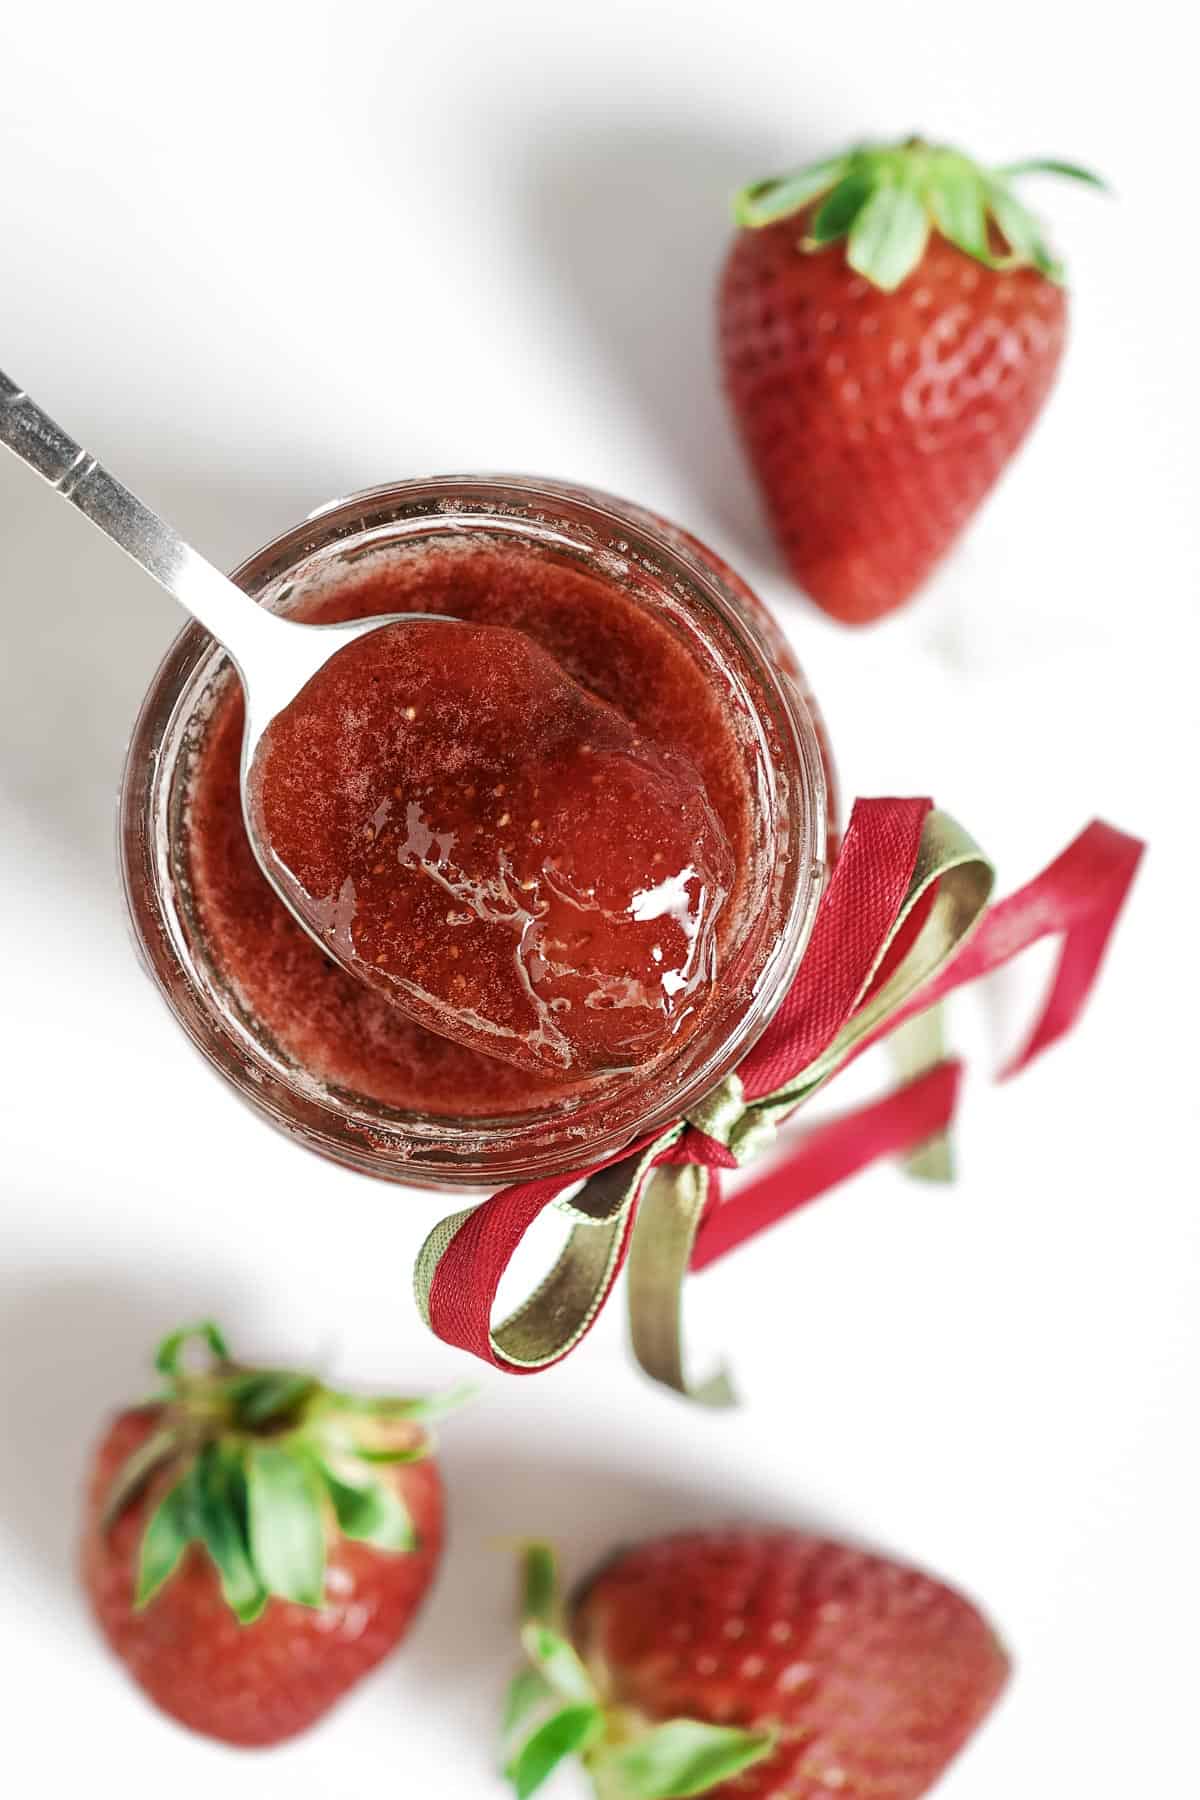 A scoop of strawberry jam in a spoon over a jar of jam.